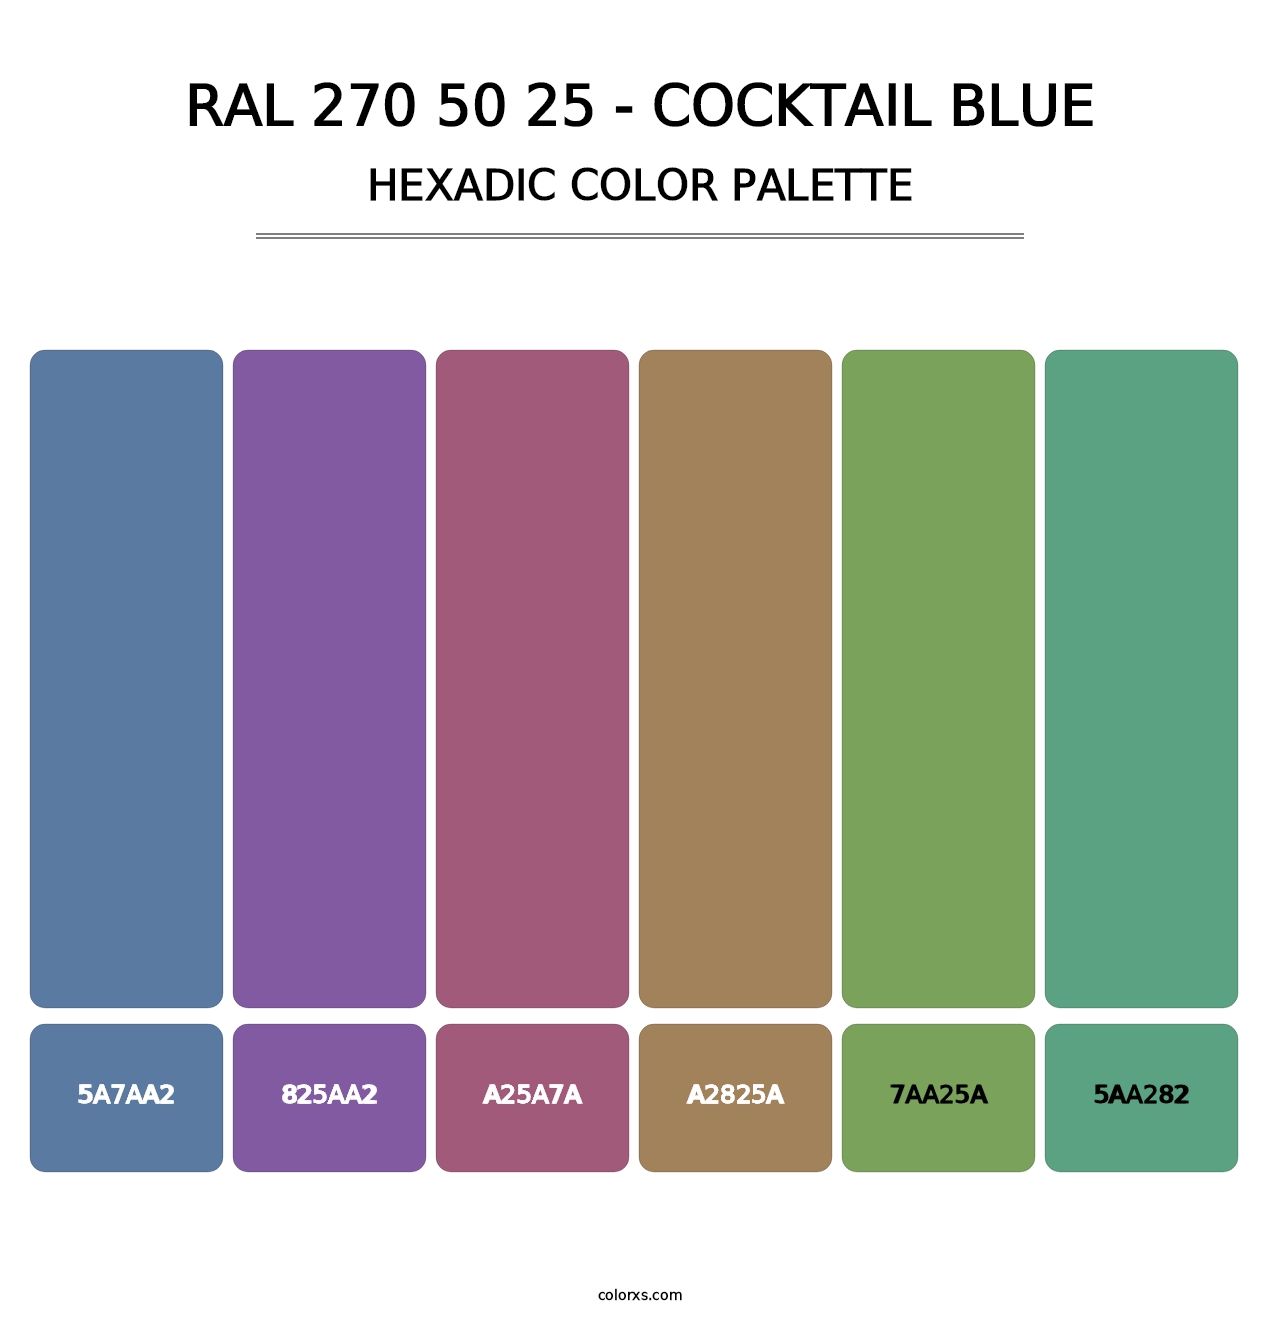 RAL 270 50 25 - Cocktail Blue - Hexadic Color Palette